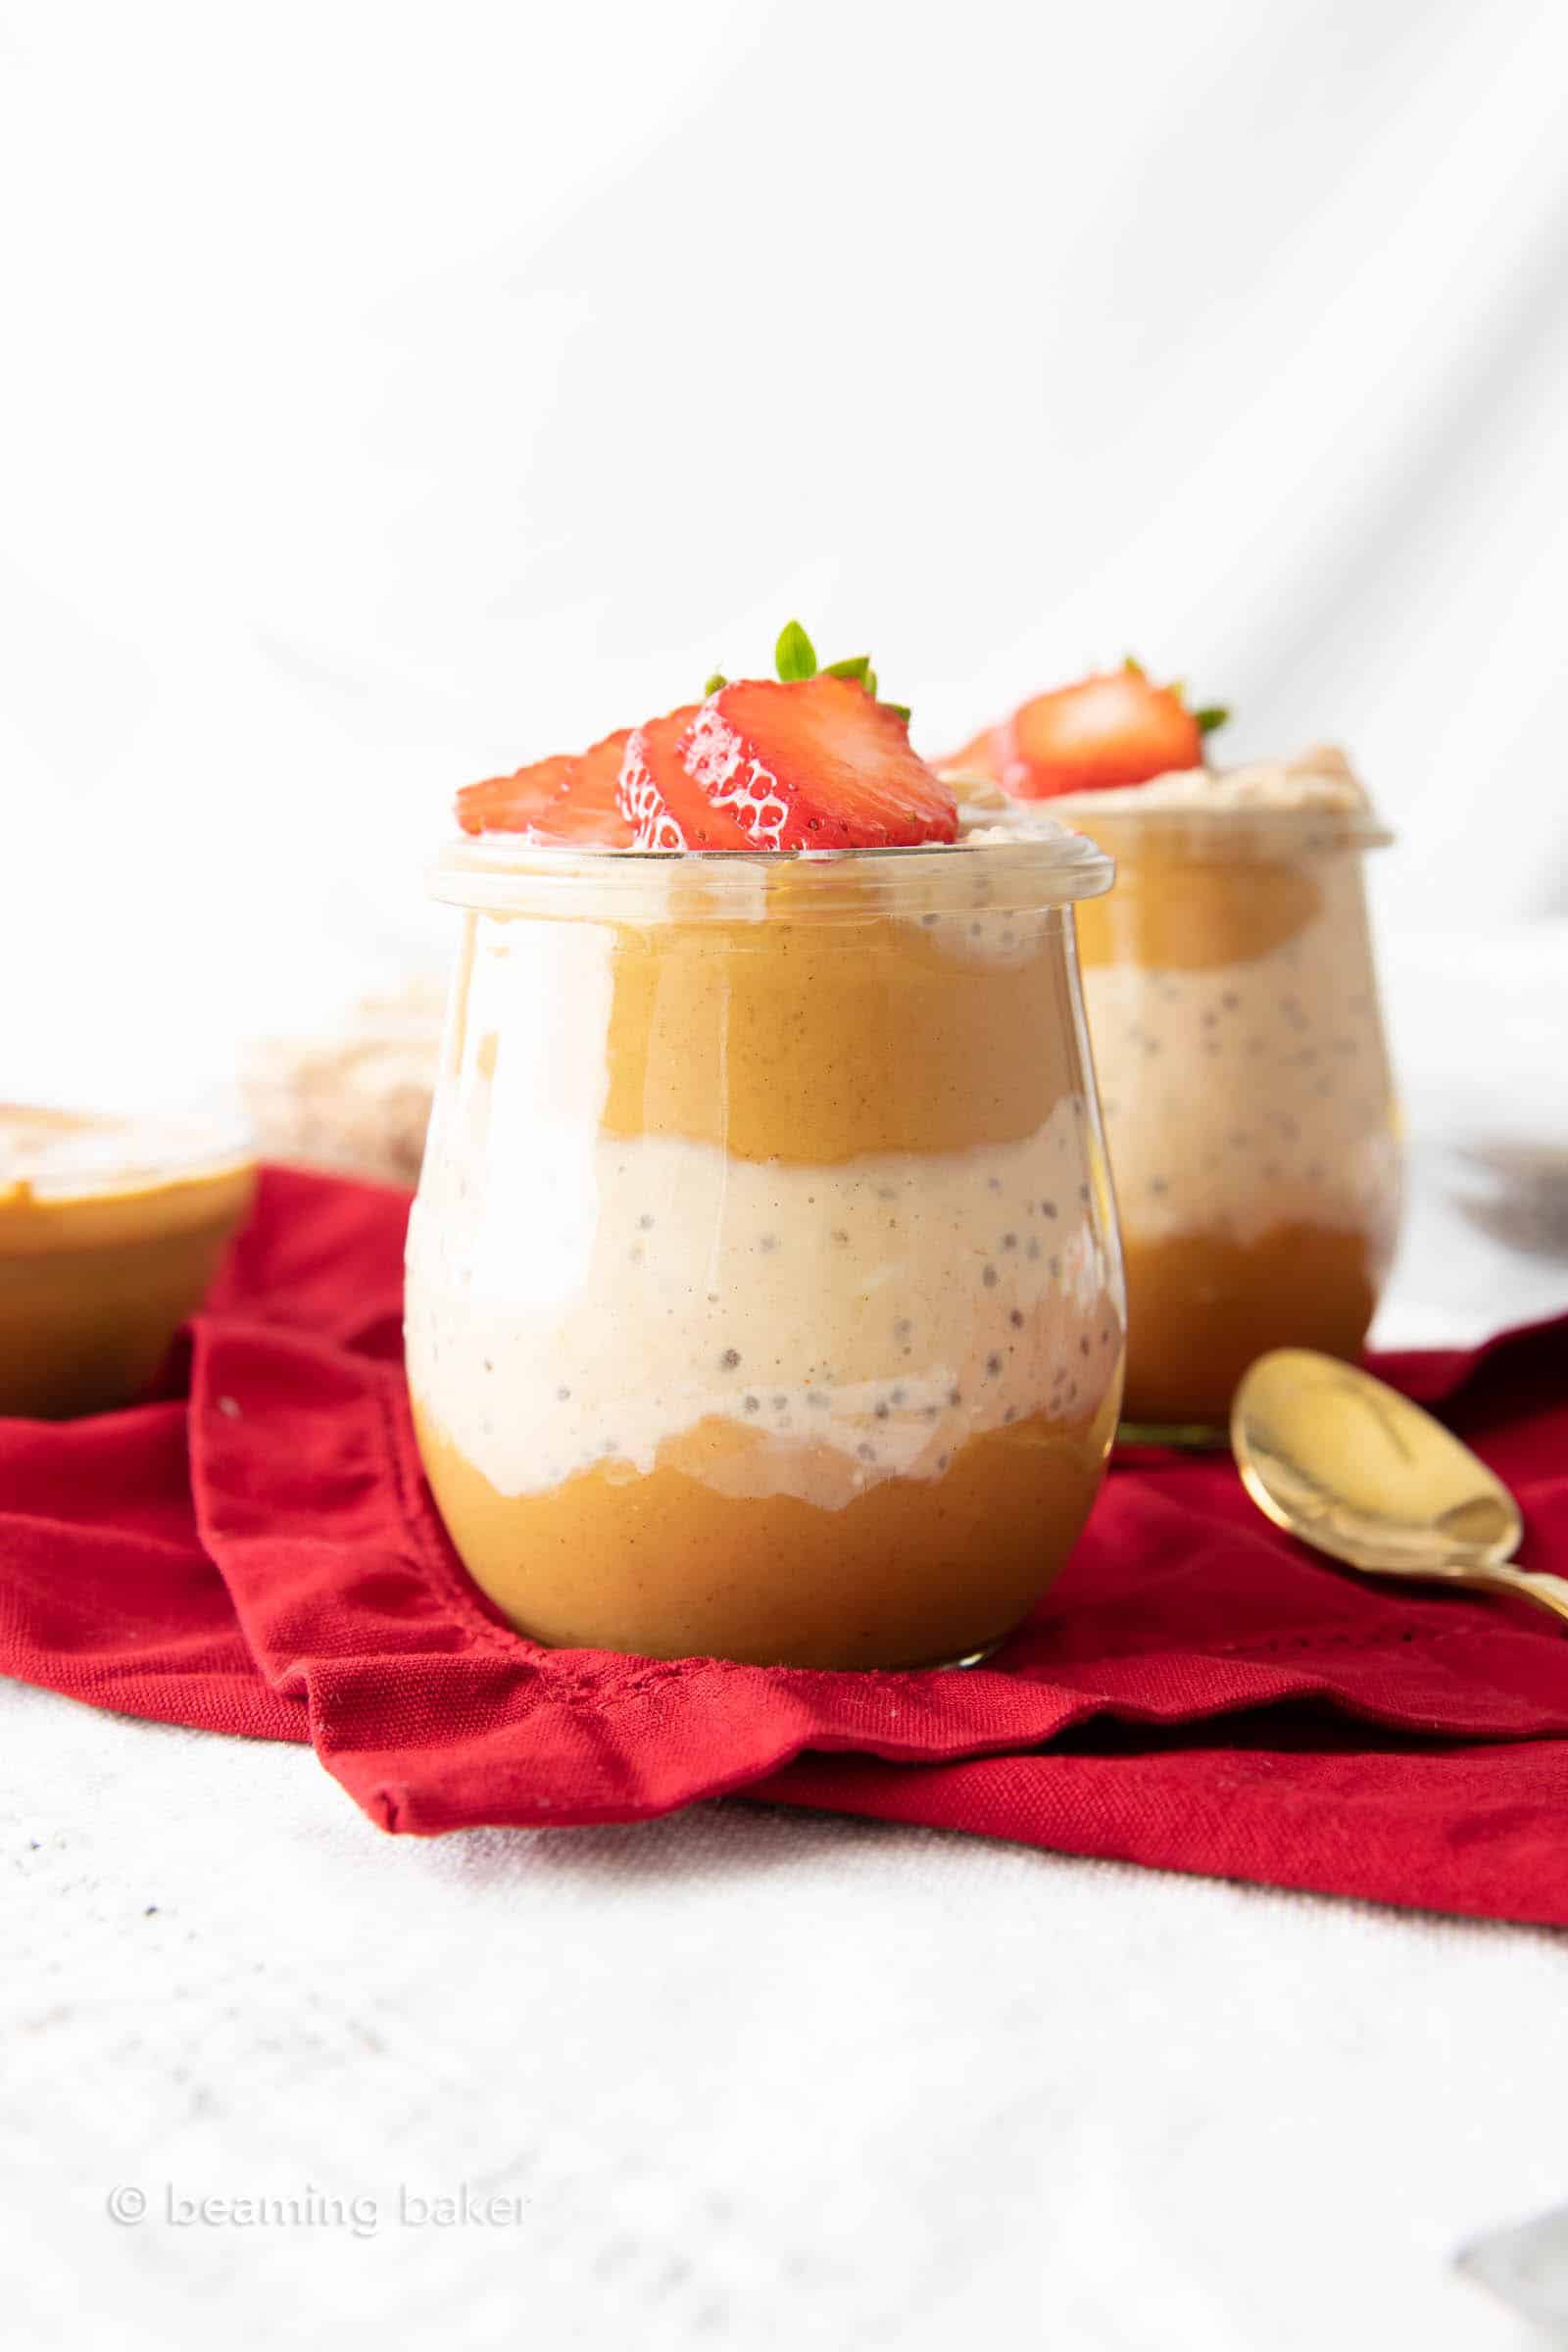 Two jars of this peanut butter overnight oats recipe with a golden spoon